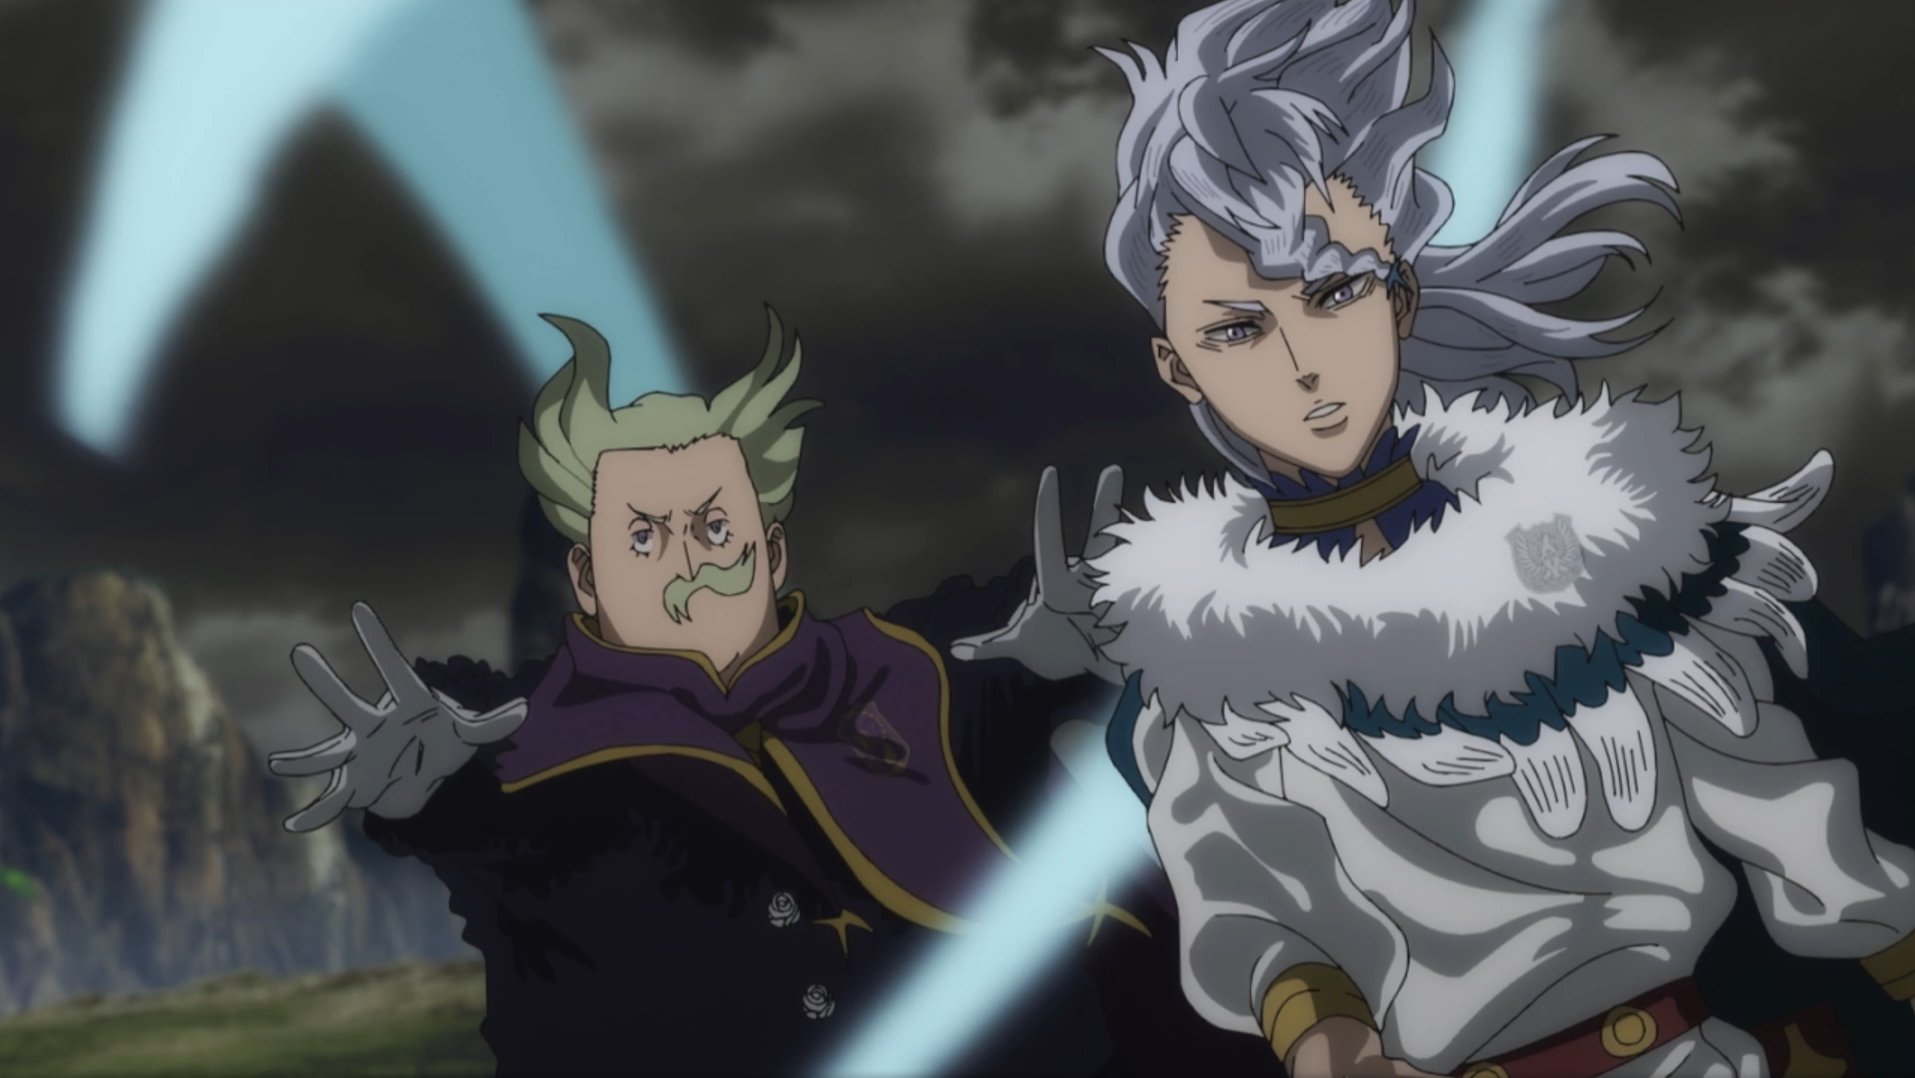 Black Clover Perfect Shots on Twitter: "Best team up of the 